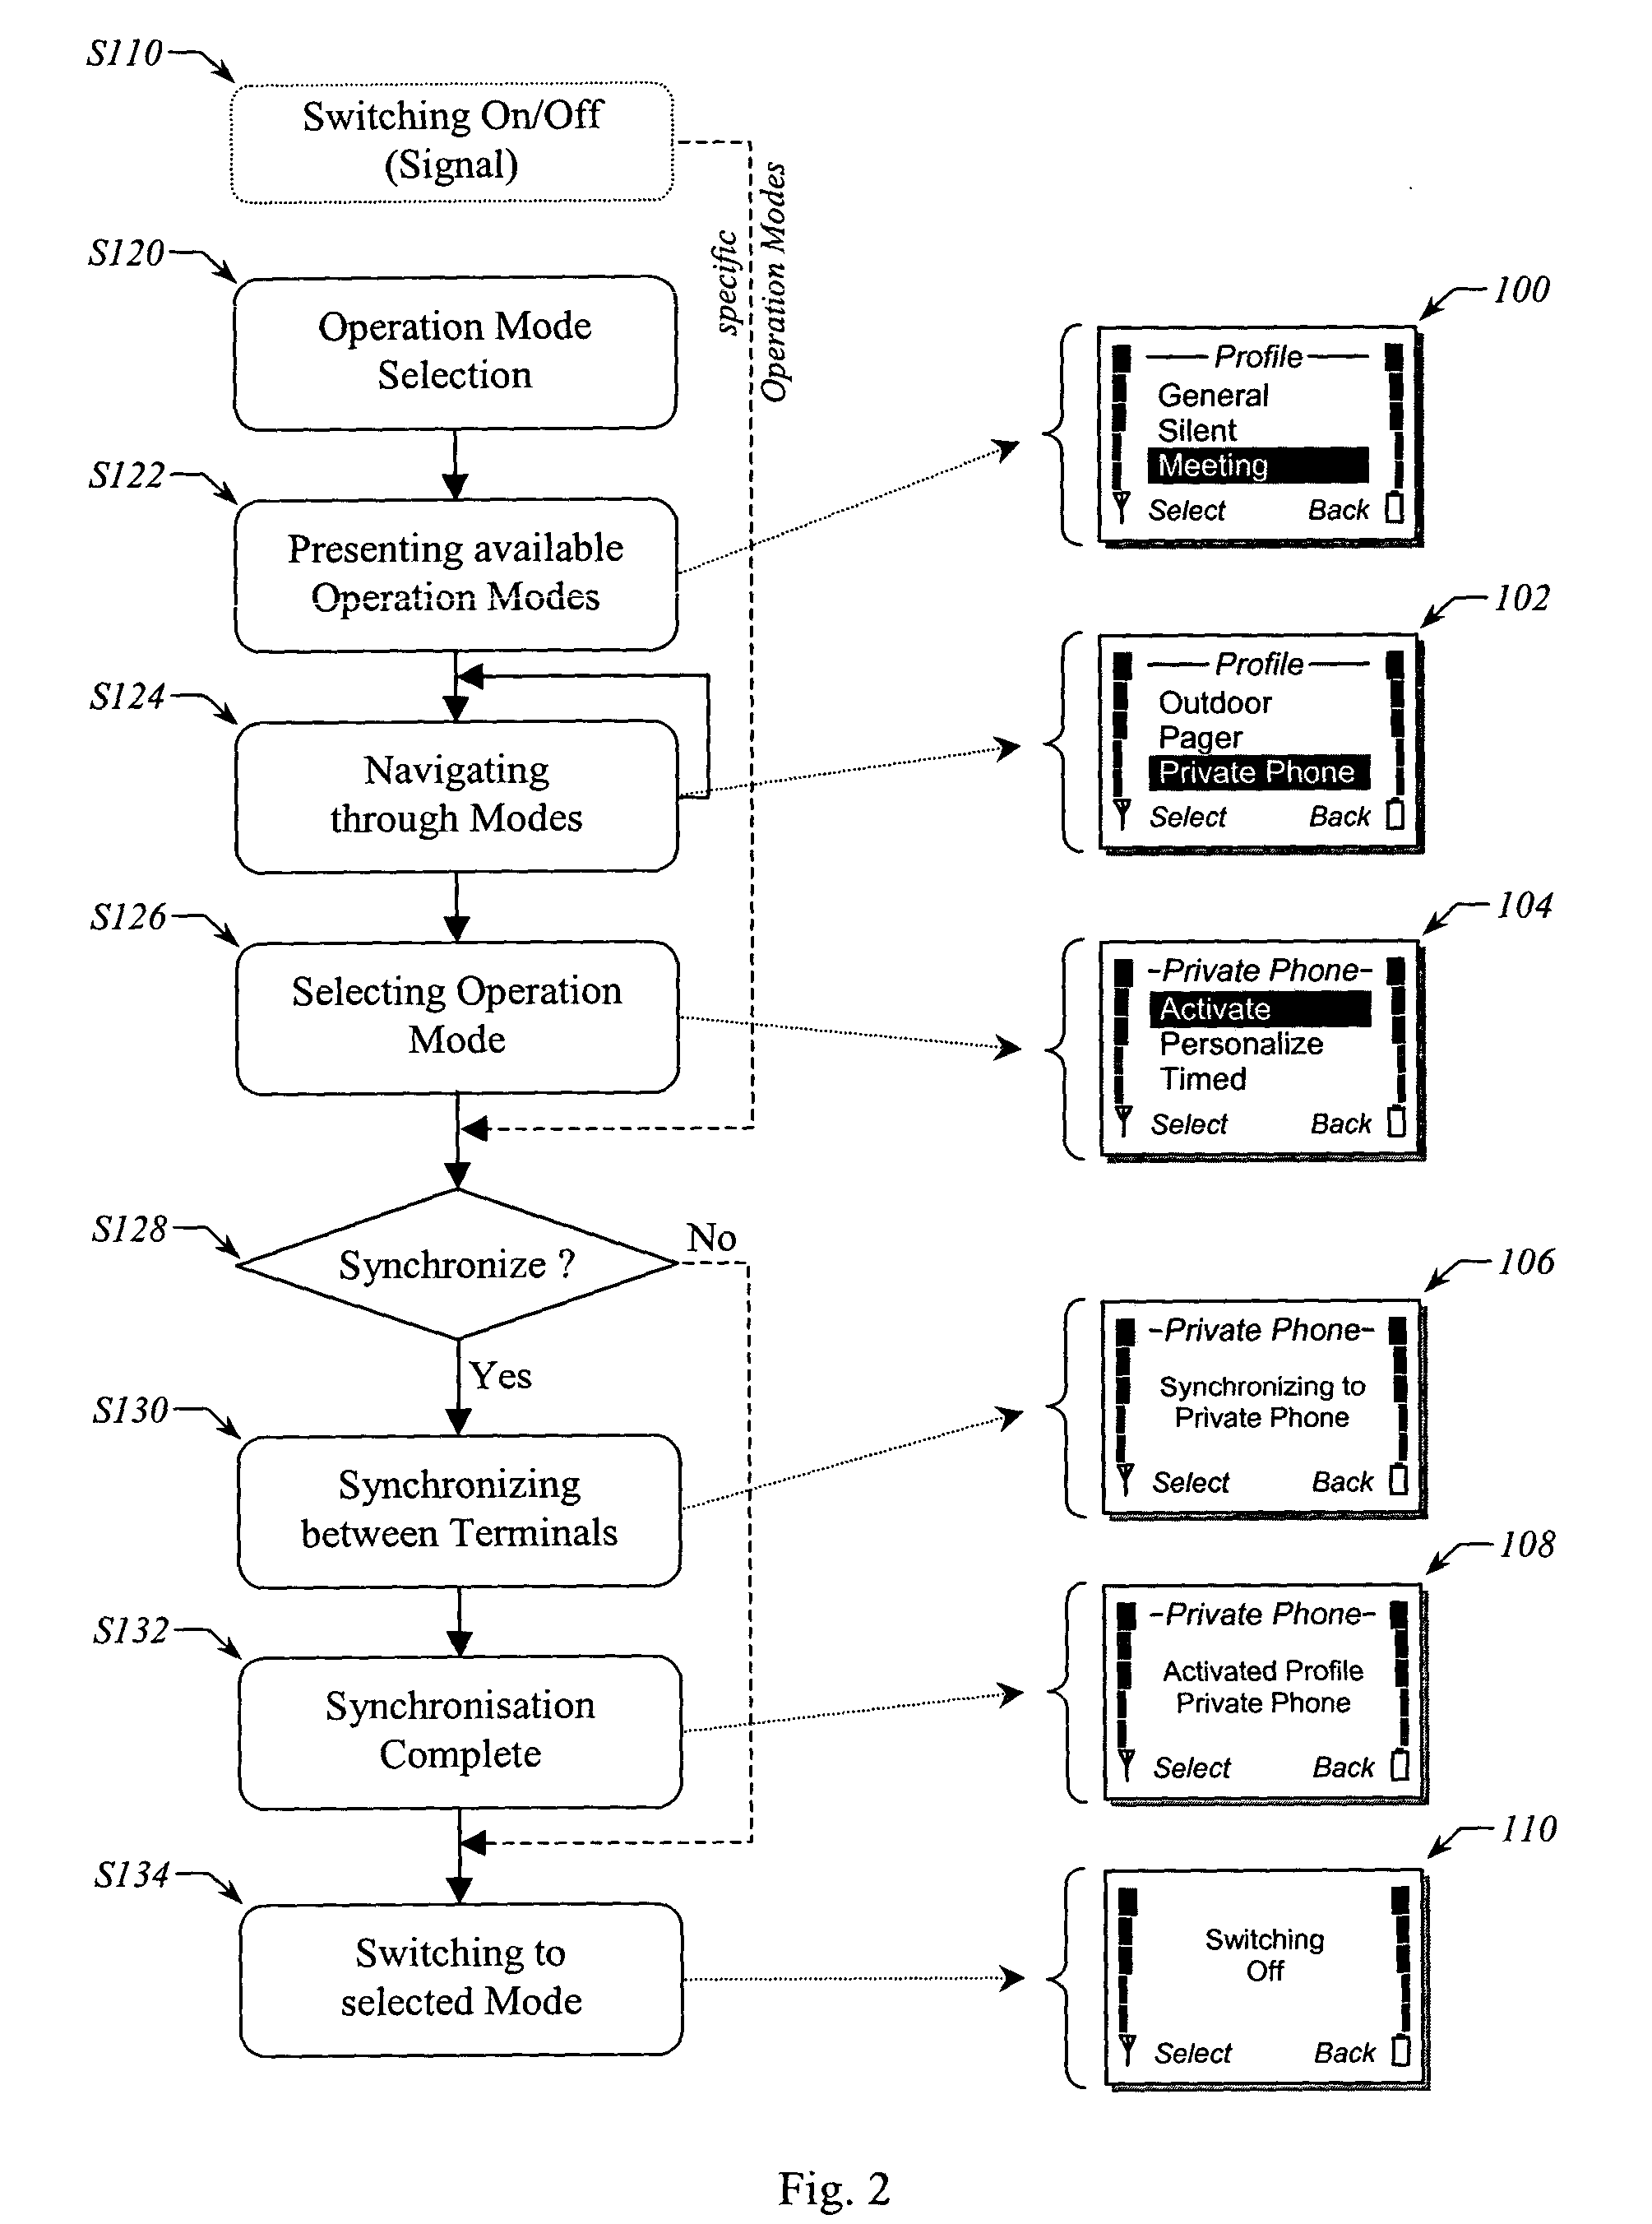 Method, device and system for automated synchronization between terminals